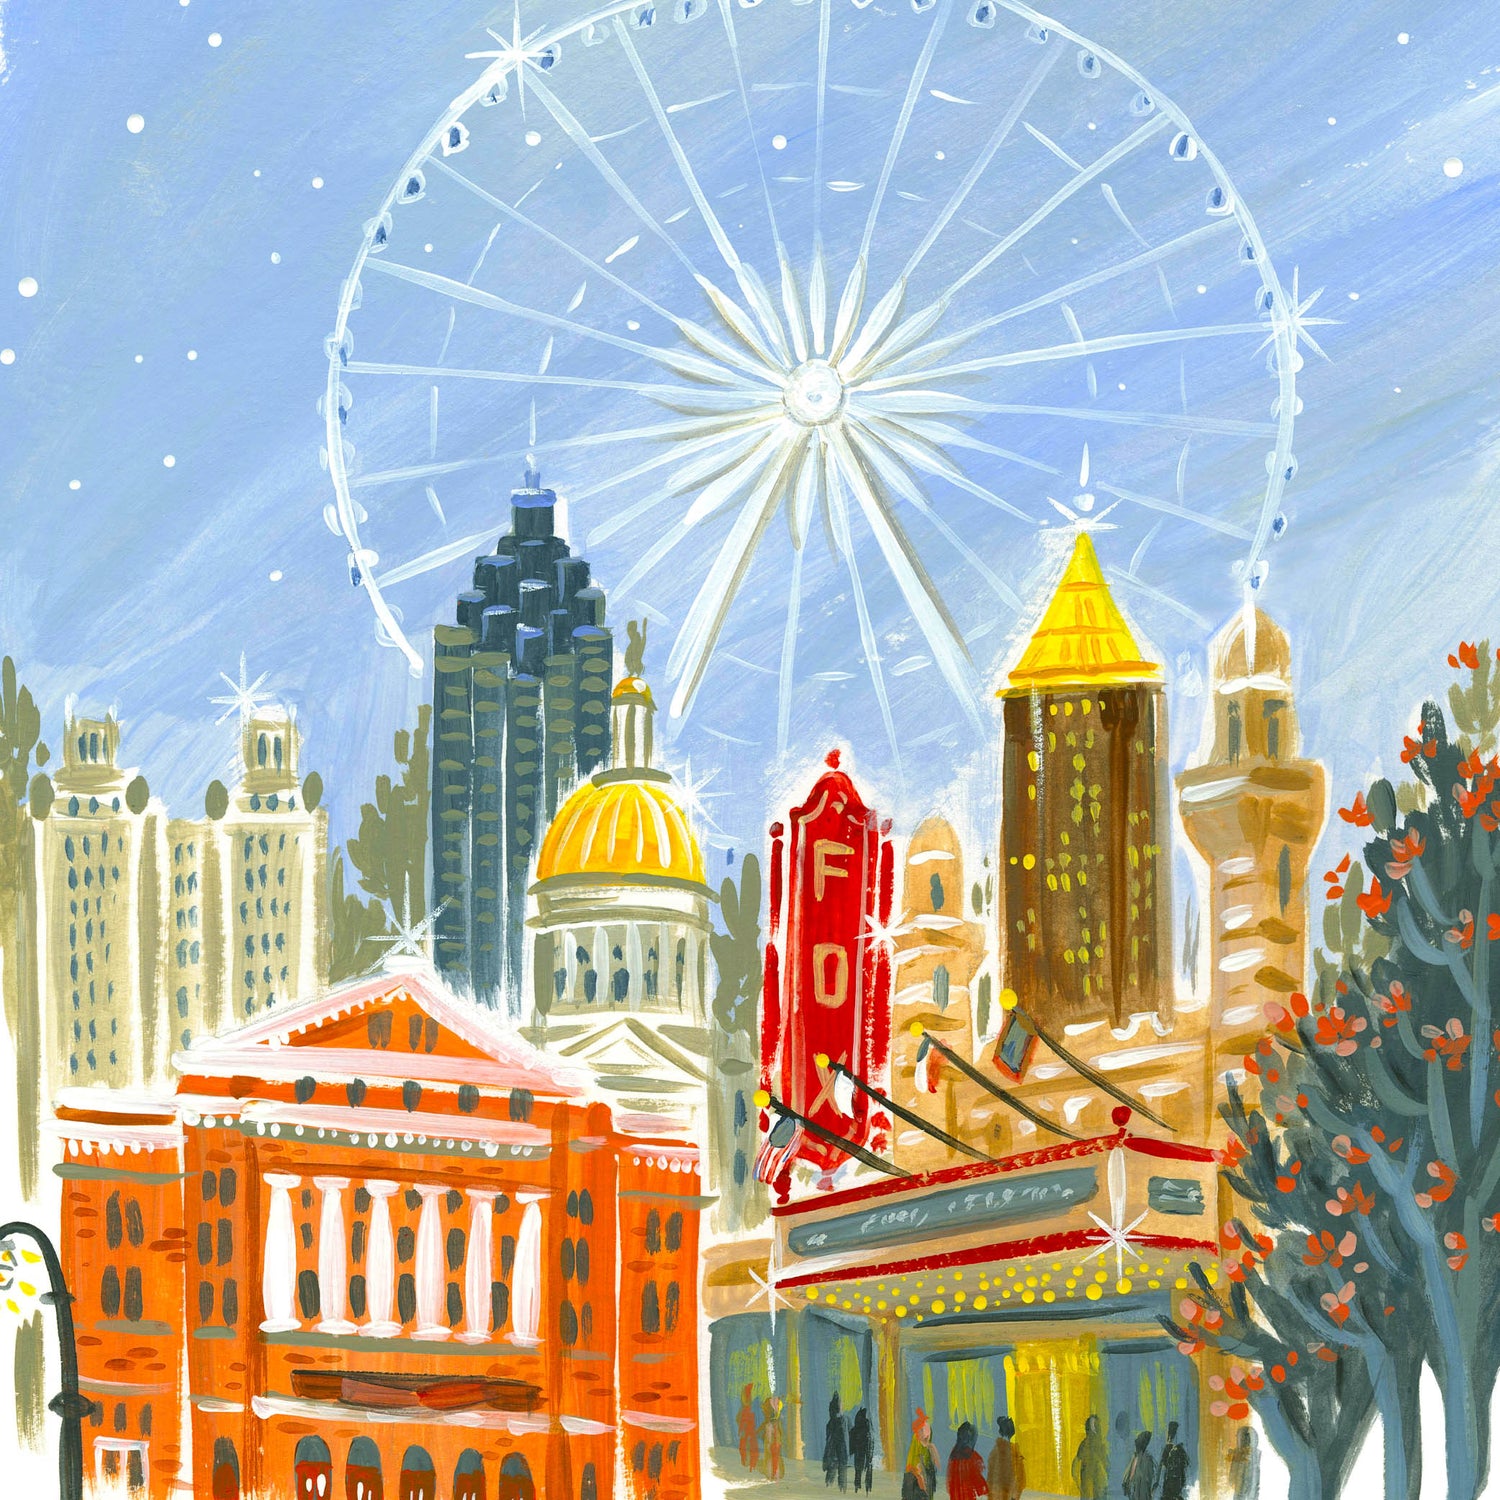 Downtown Atlanta skyline art detail with Fox Theater and ferris wheel; illustration by Angela Staehling